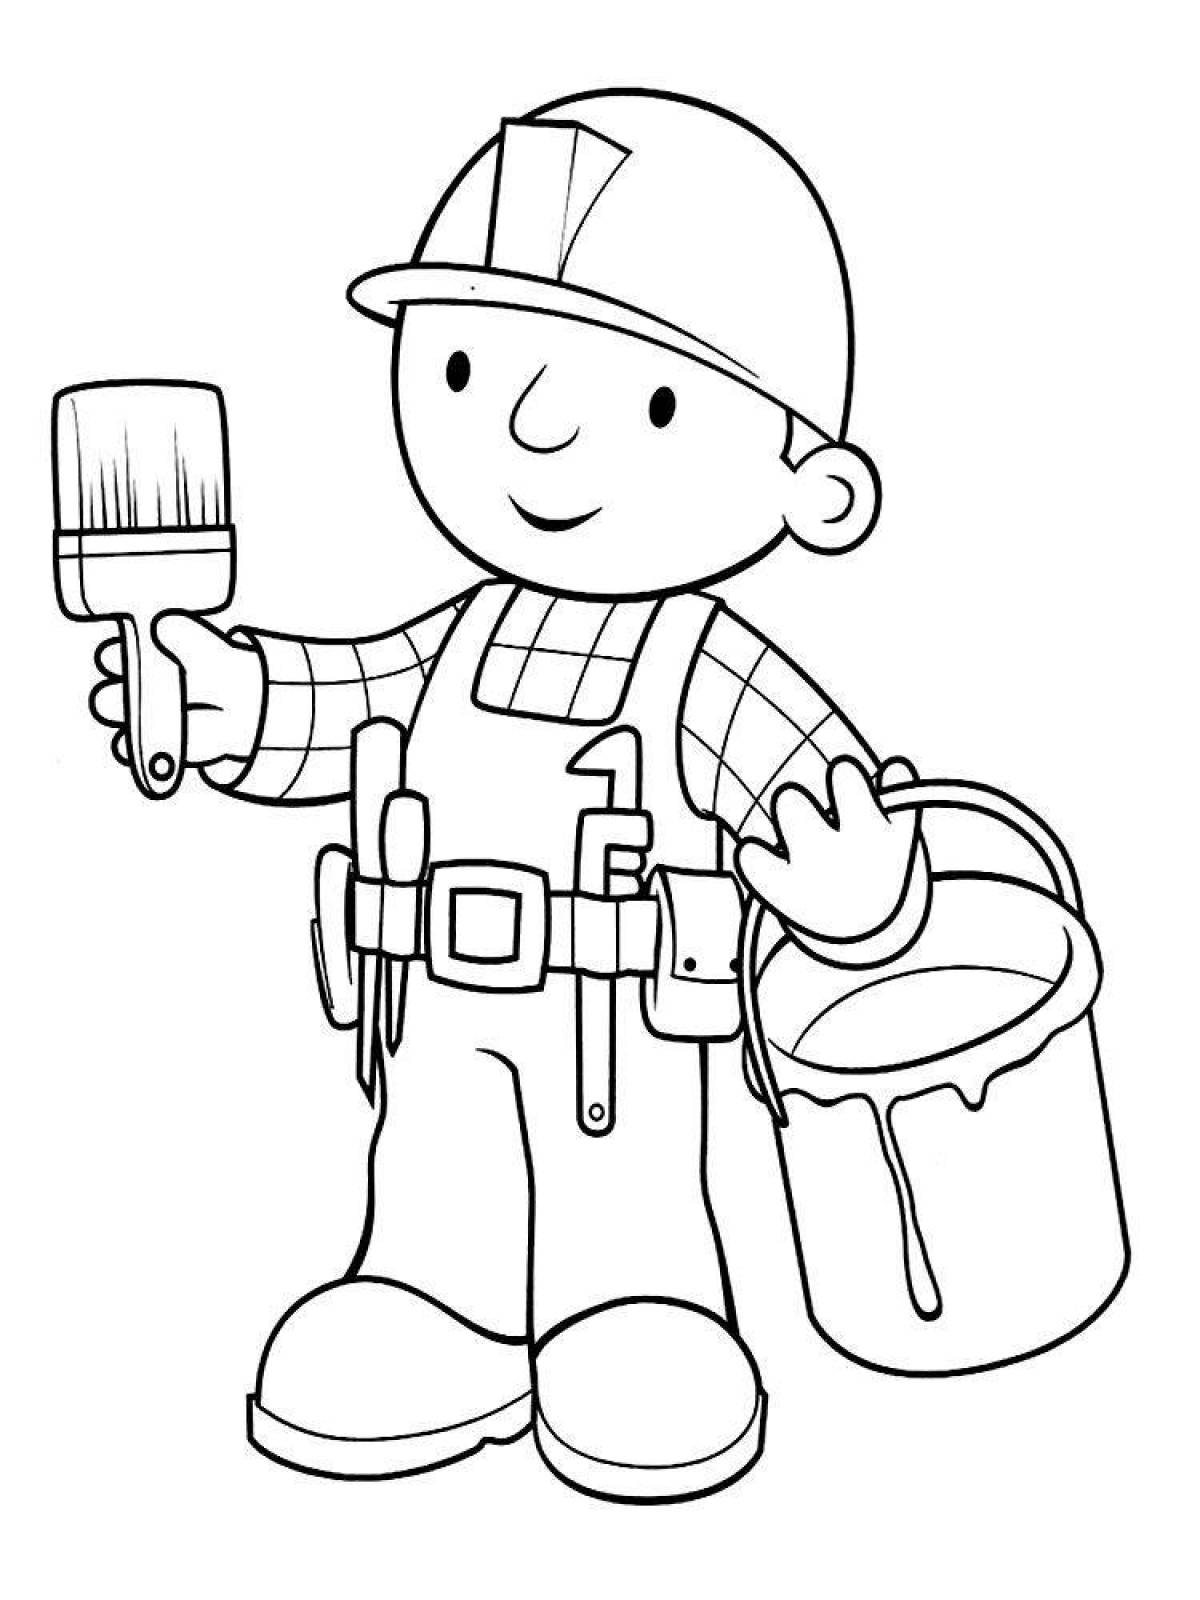 Entertaining coloring pages of professions for children 5-6 years old